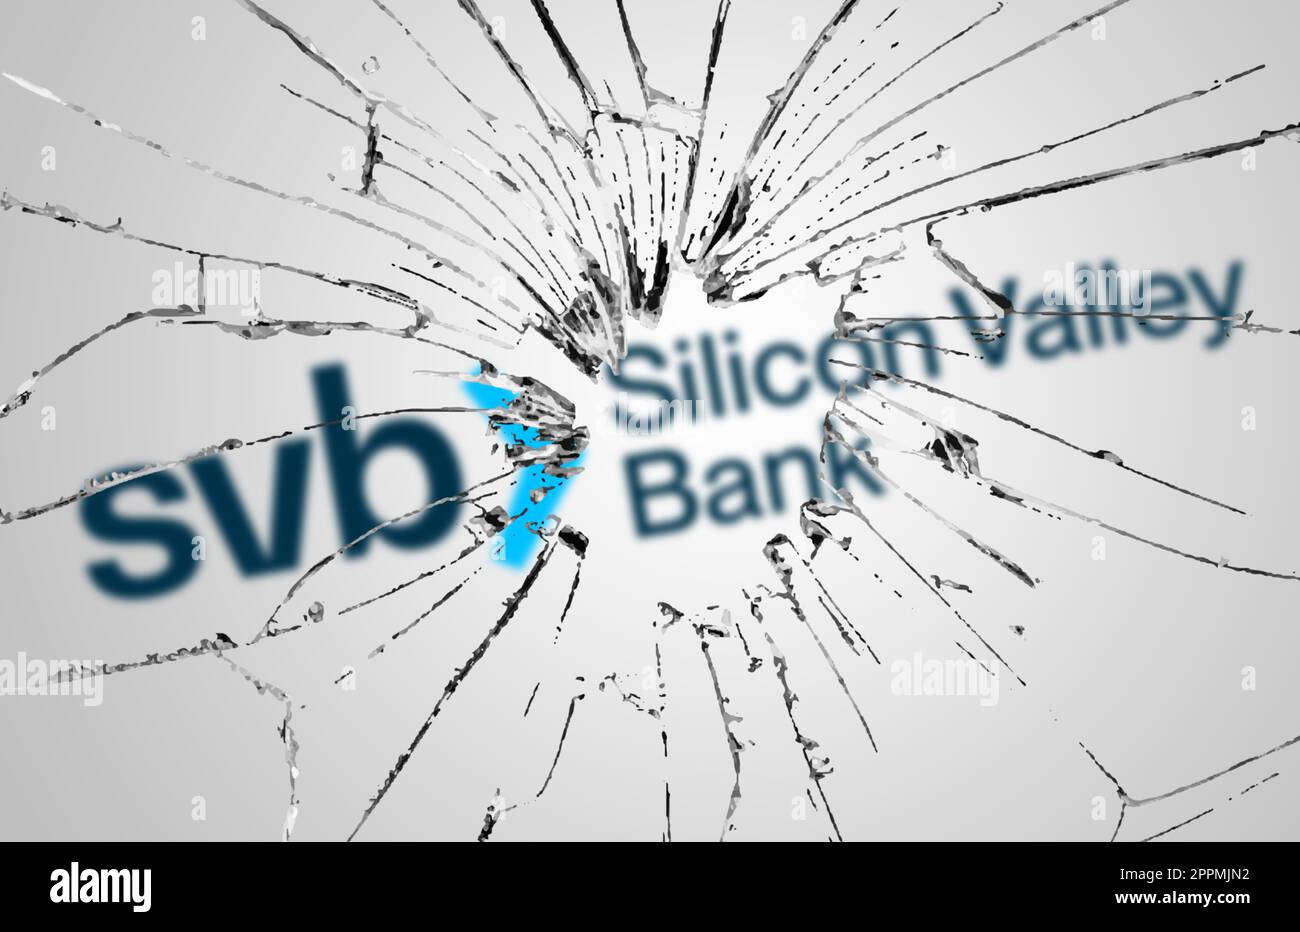 Broken glass with the Silicon Valley Bank logo blurred in the background Stock Photo